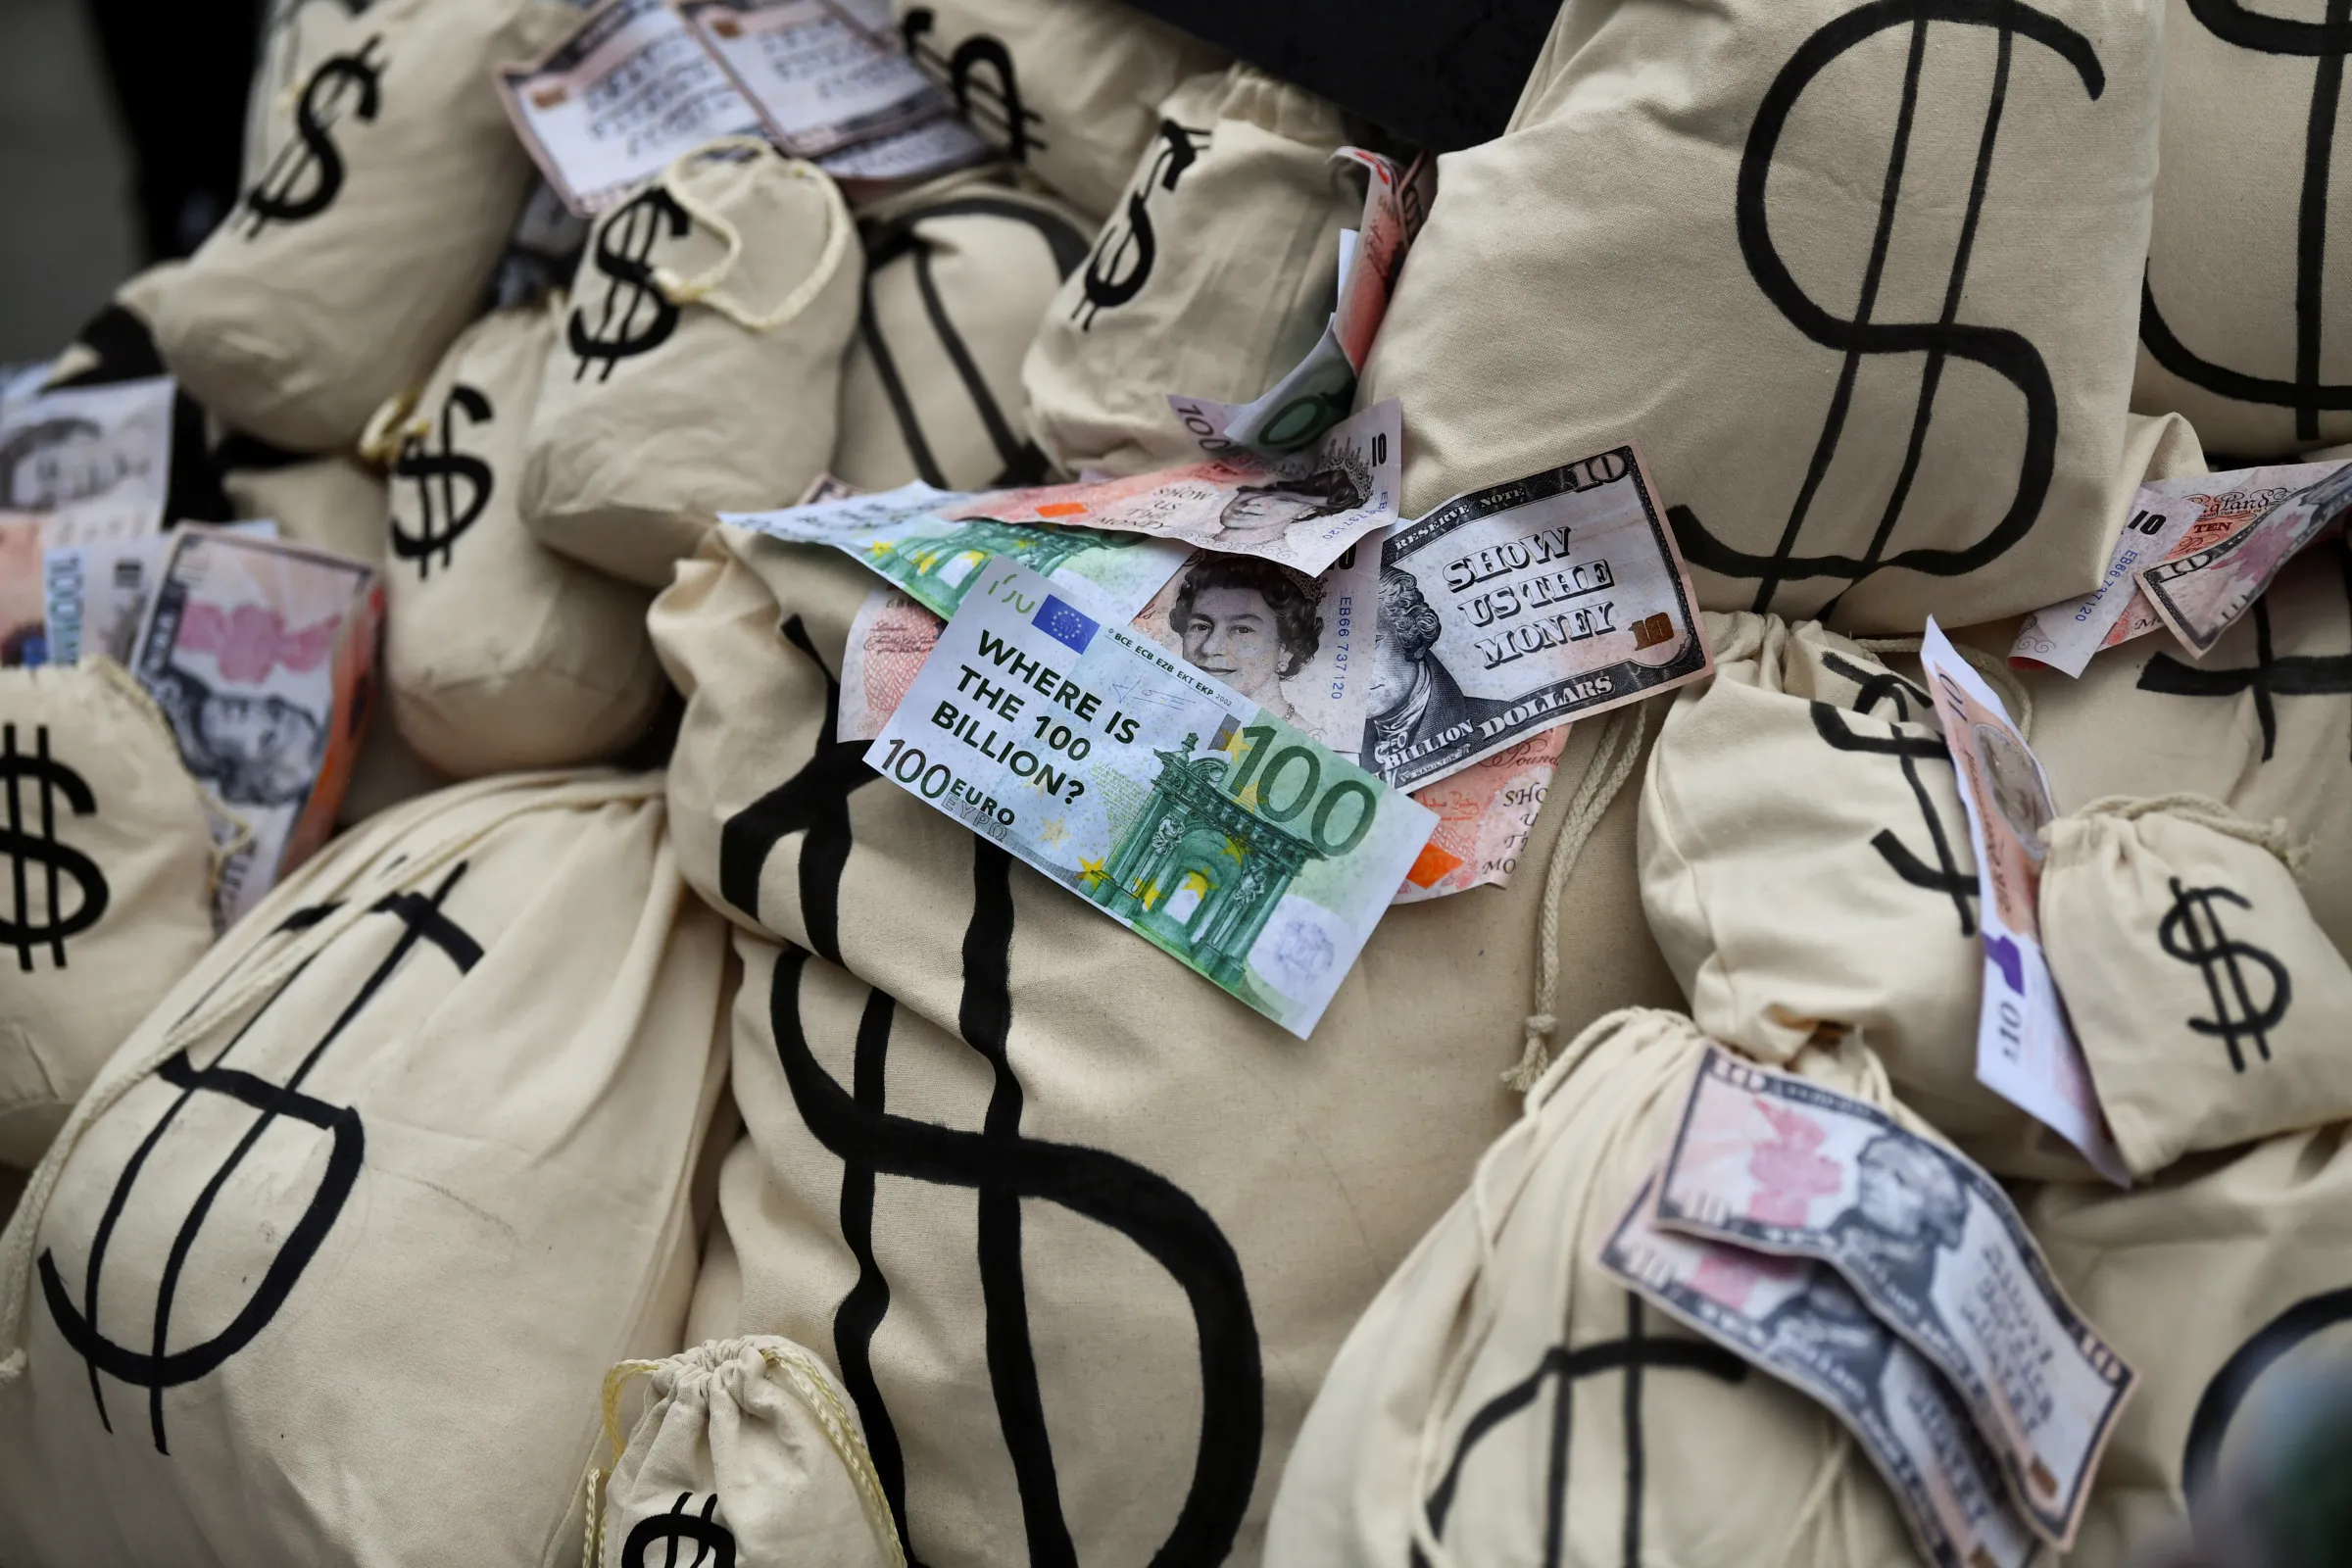 Mock money bags and banknotes are piled up during a protest at the UN Climate Change Conference (COP26) in Glasgow, Scotland, Britain November 12, 2021